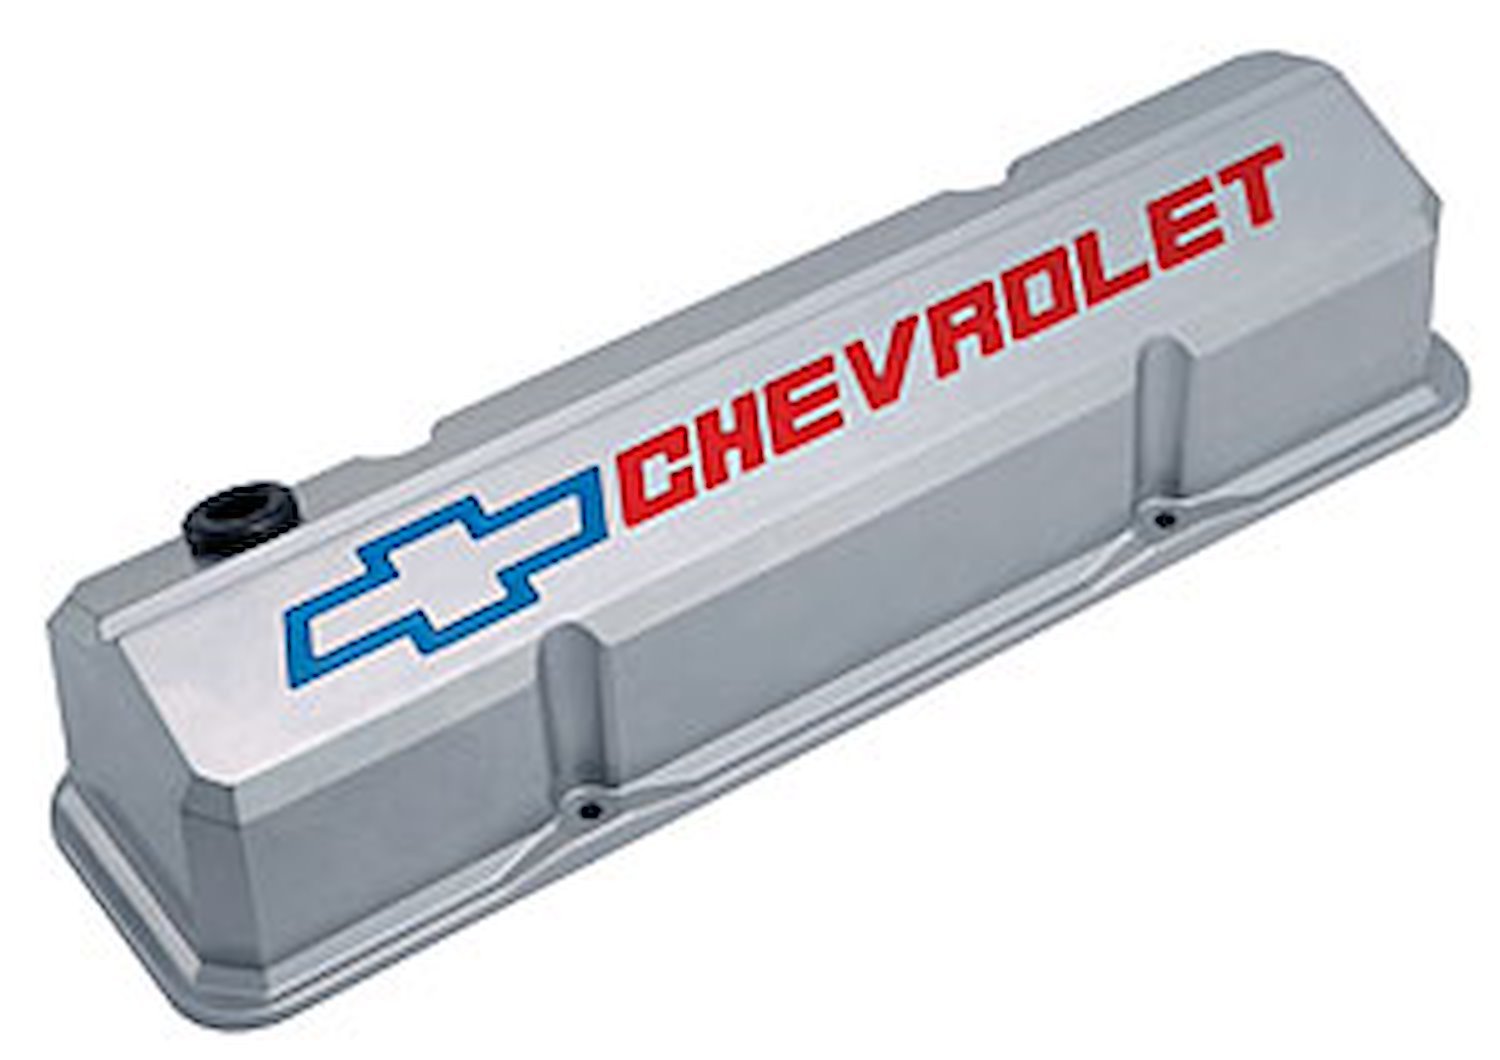 Die-Cast Slant-Edge Valve Covers for 1958-1986 Small Block Chevy Chevrolet/Bowtie Recessed Emblem in Metallic Gray Finish